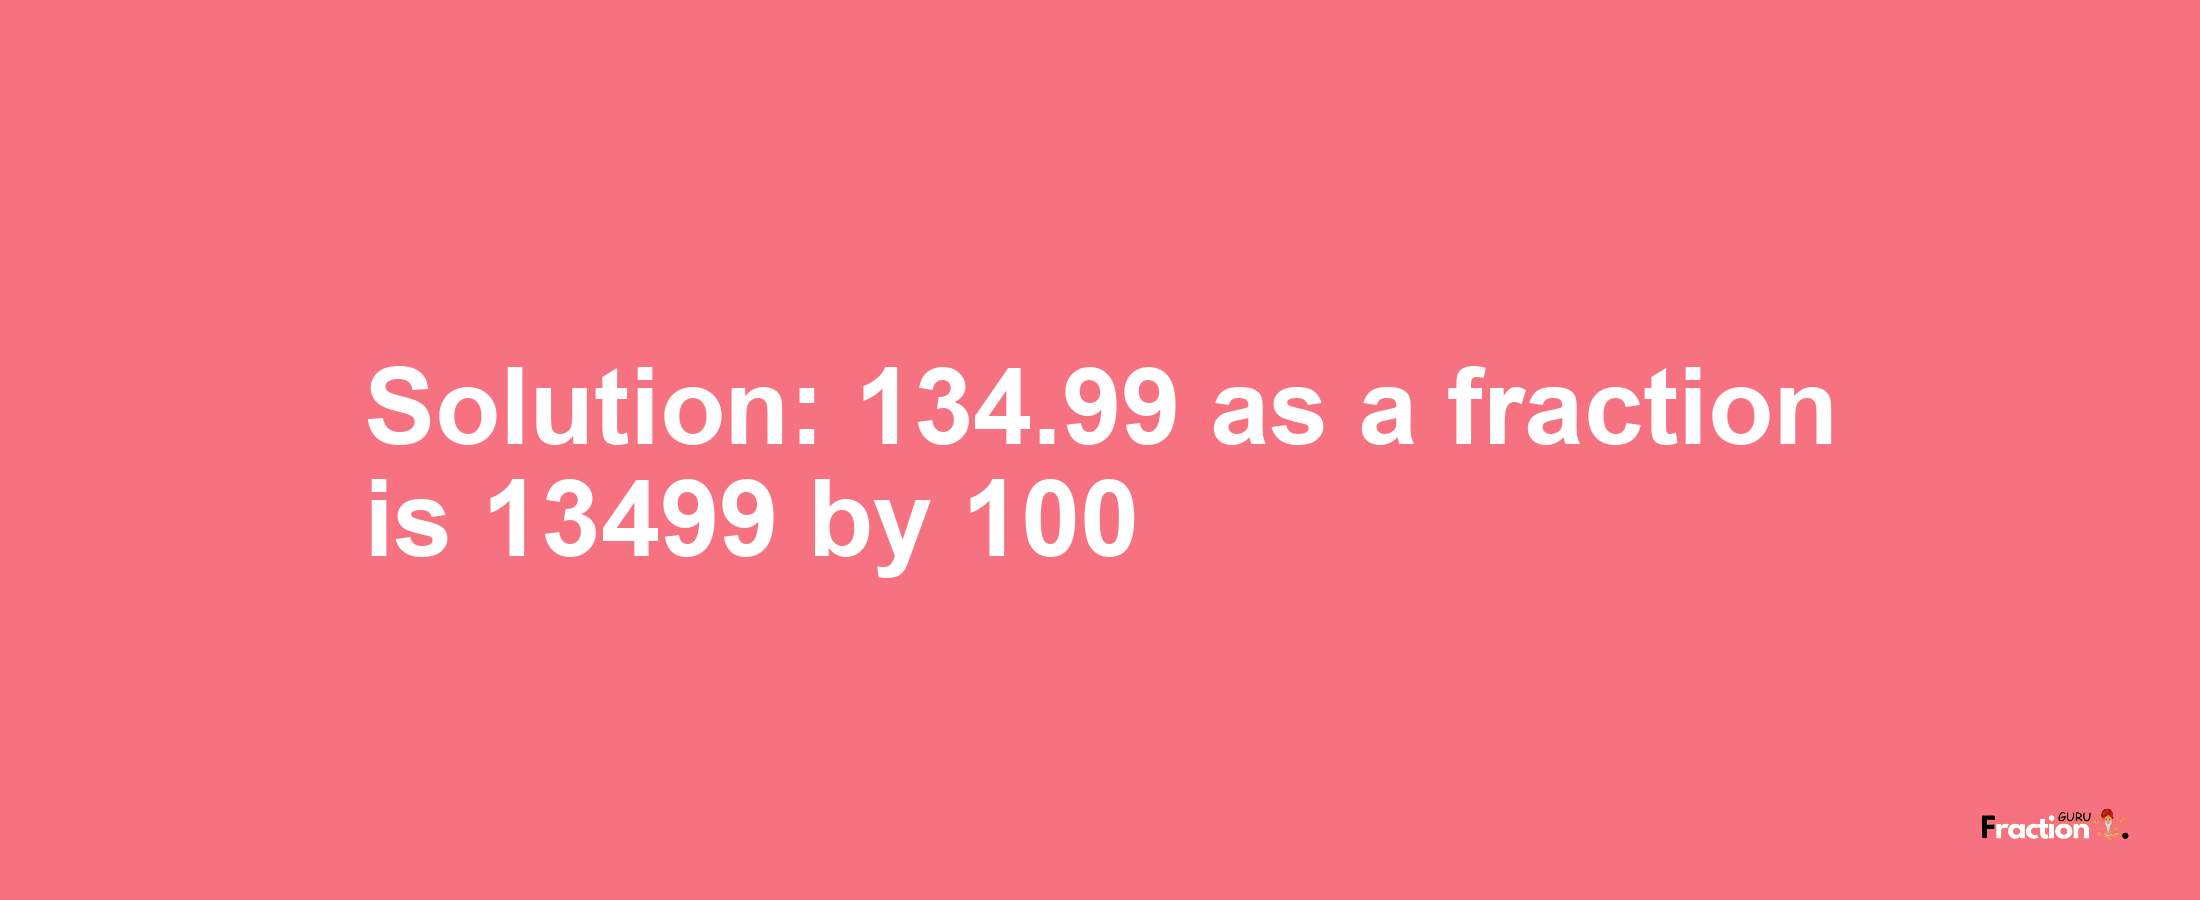 Solution:134.99 as a fraction is 13499/100